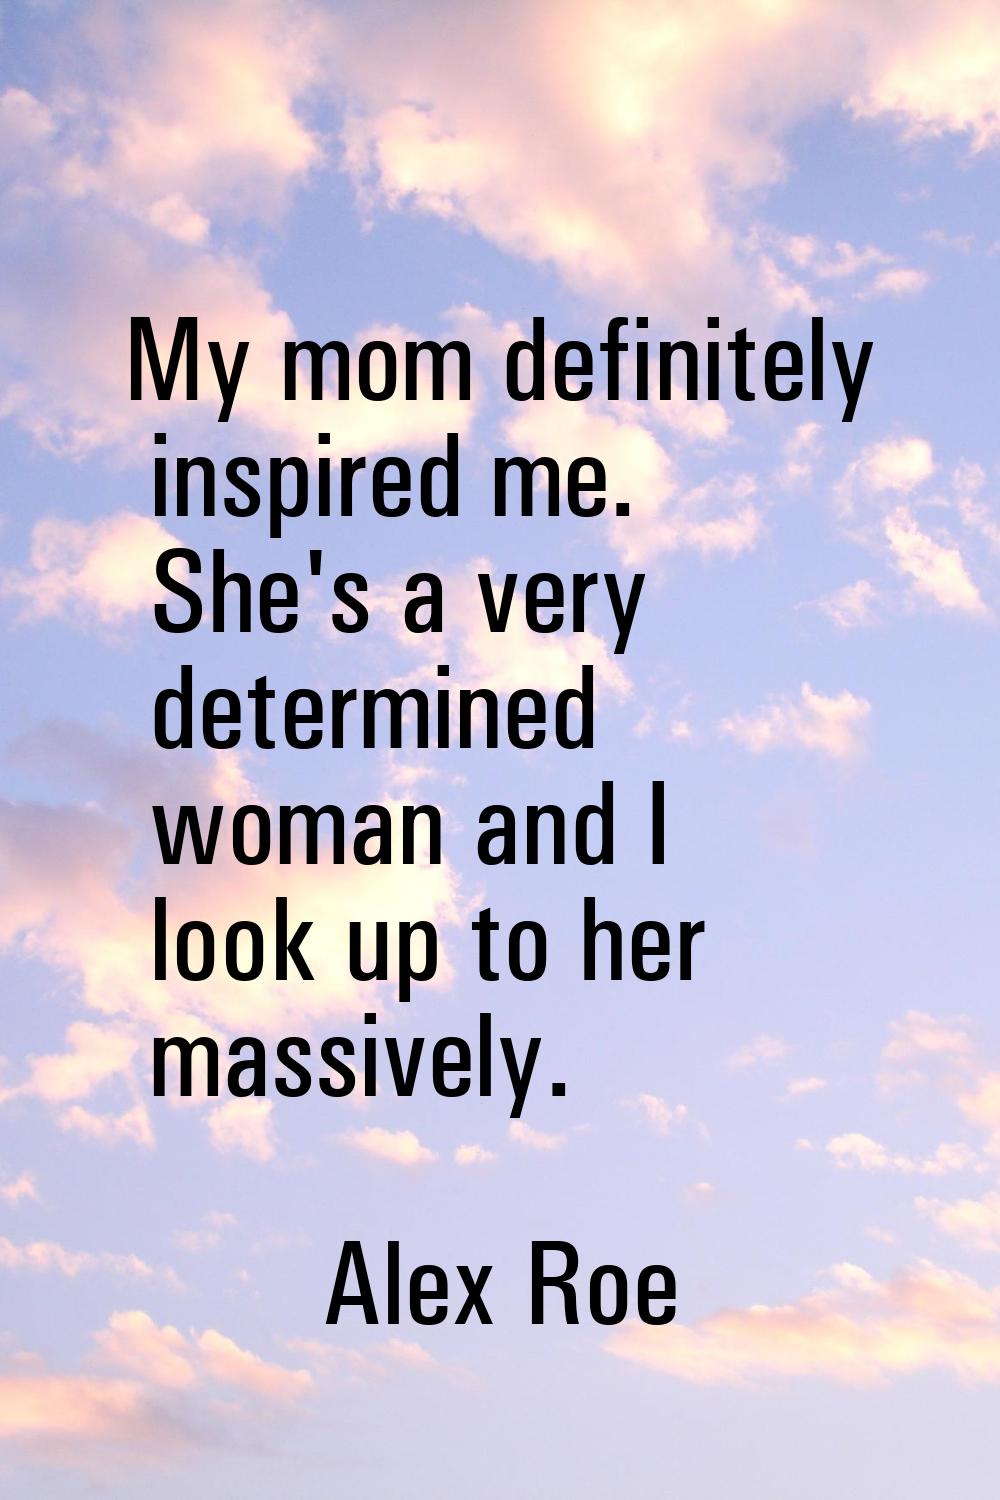 My mom definitely inspired me. She's a very determined woman and I look up to her massively.